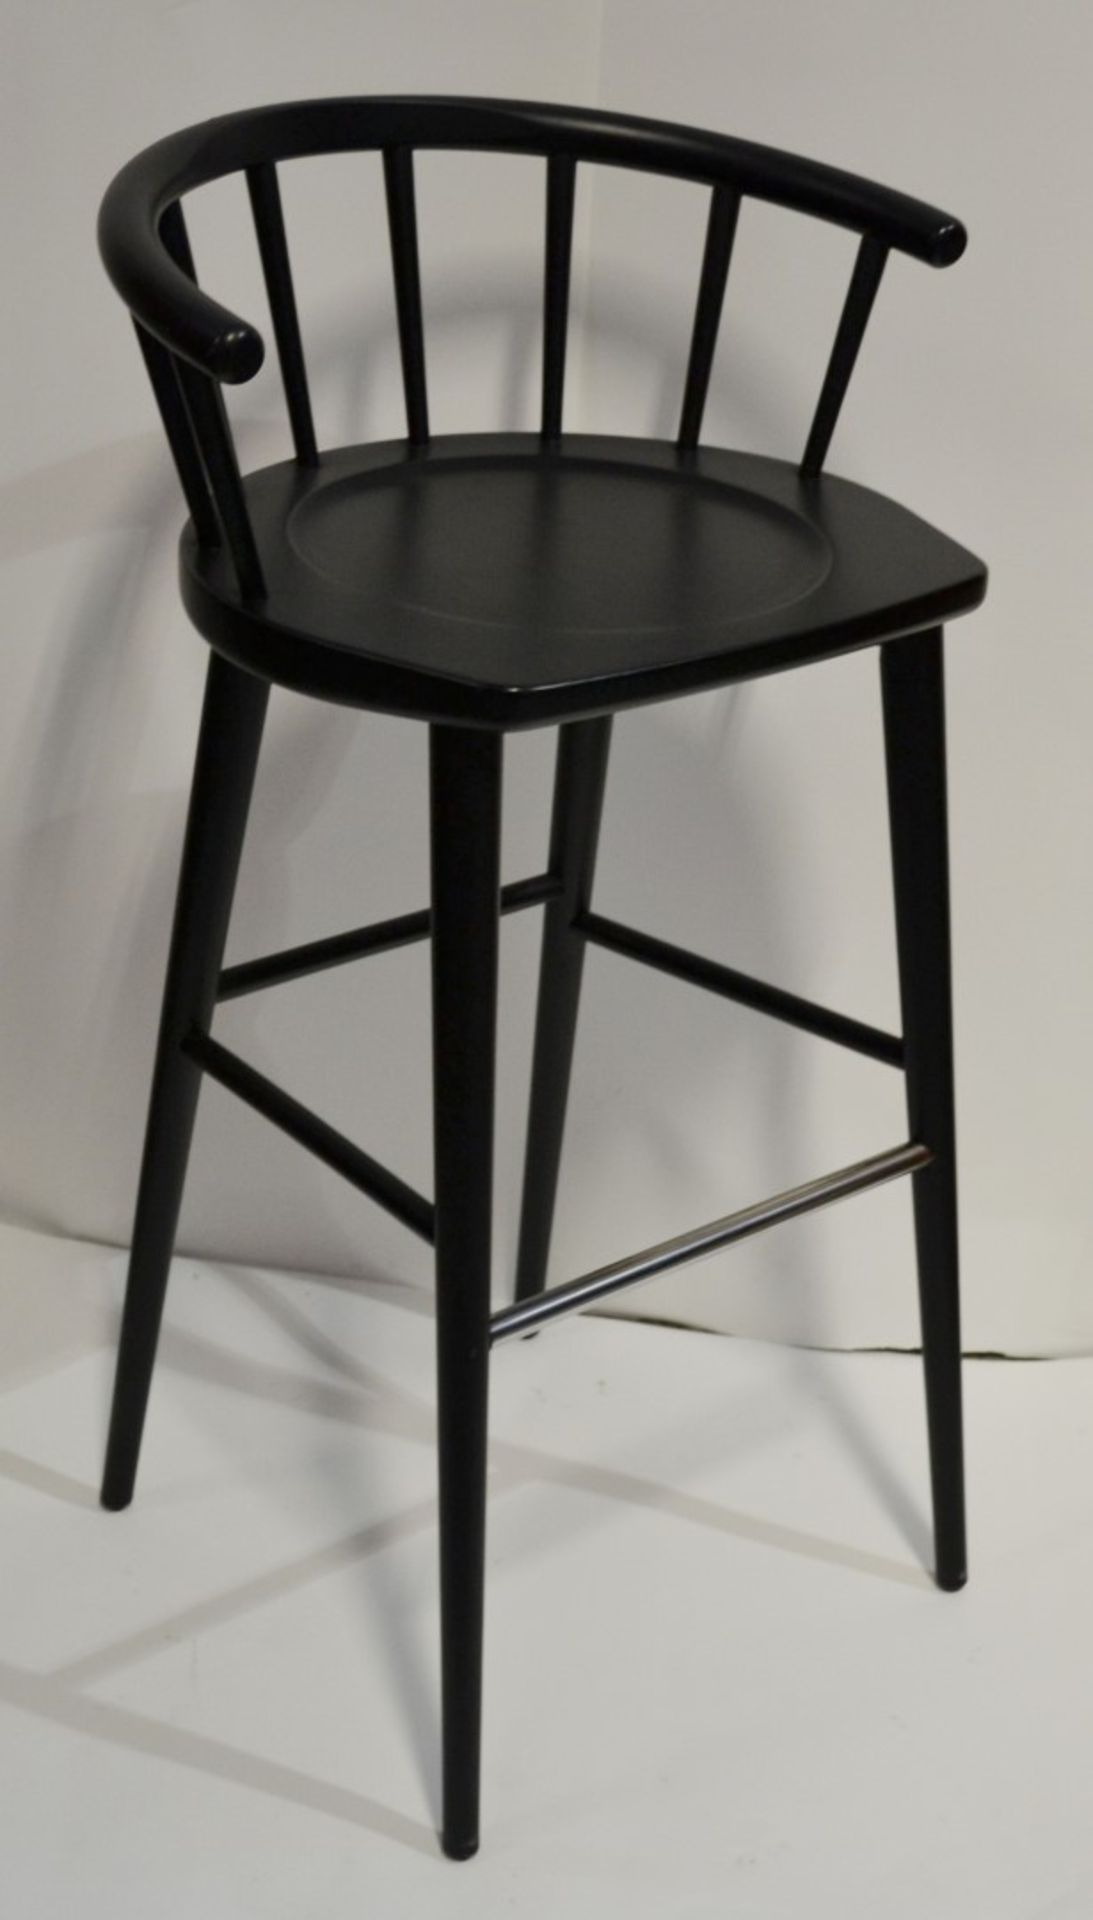 4 x Curved Spindleback Wooden Bar Stools With Shaped Seats, Chrome Footrests and Dark Finish -